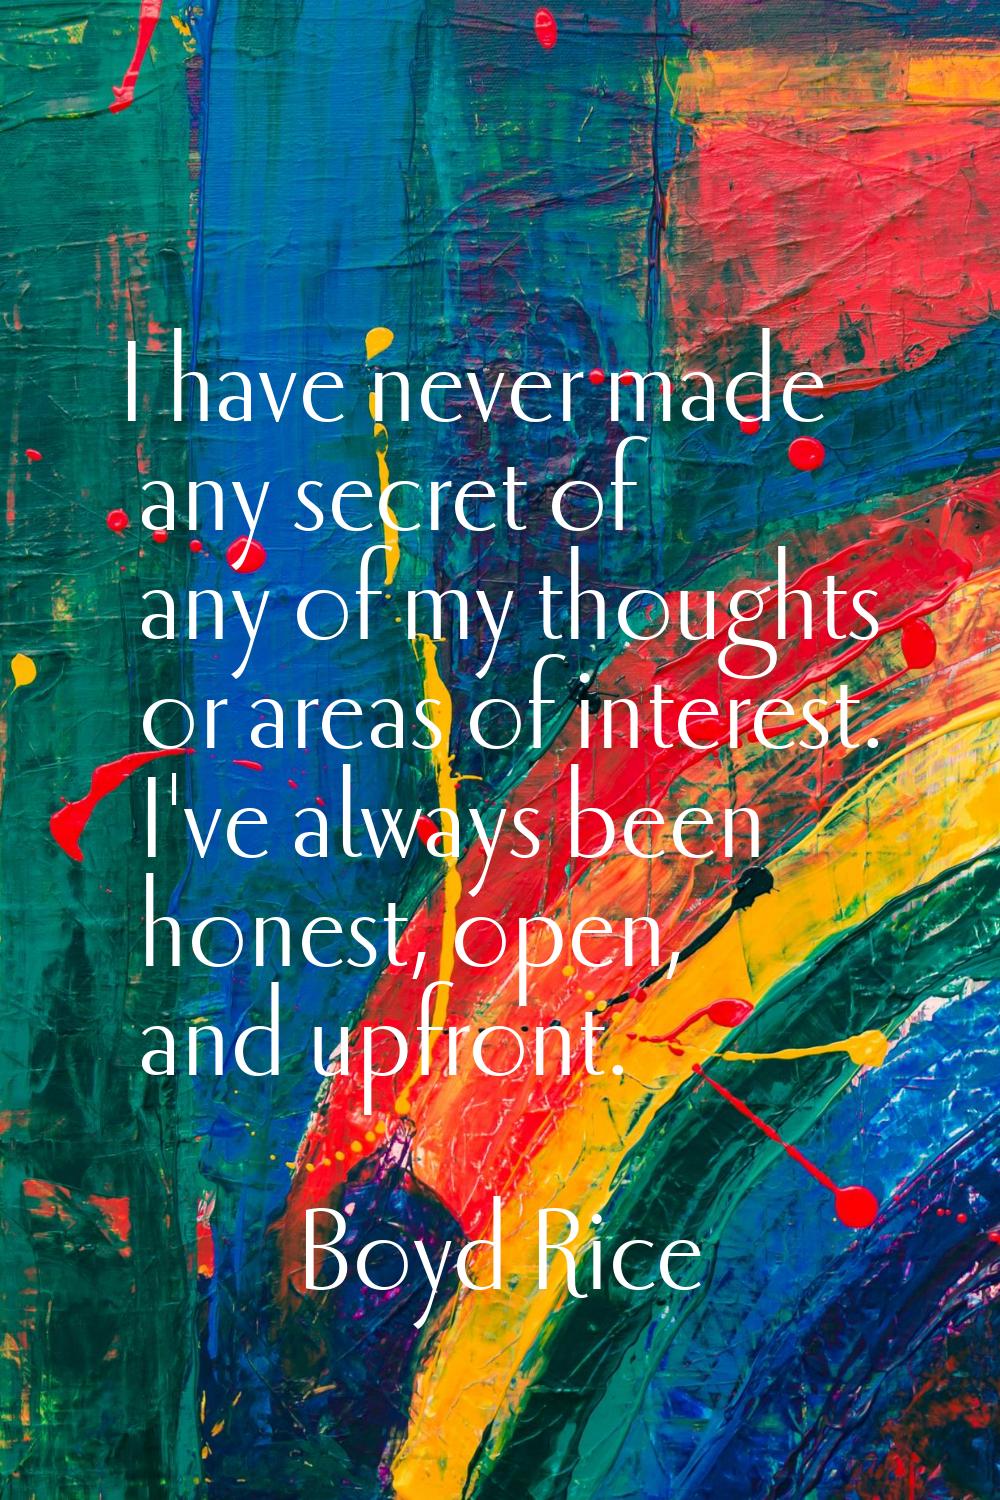 I have never made any secret of any of my thoughts or areas of interest. I've always been honest, o